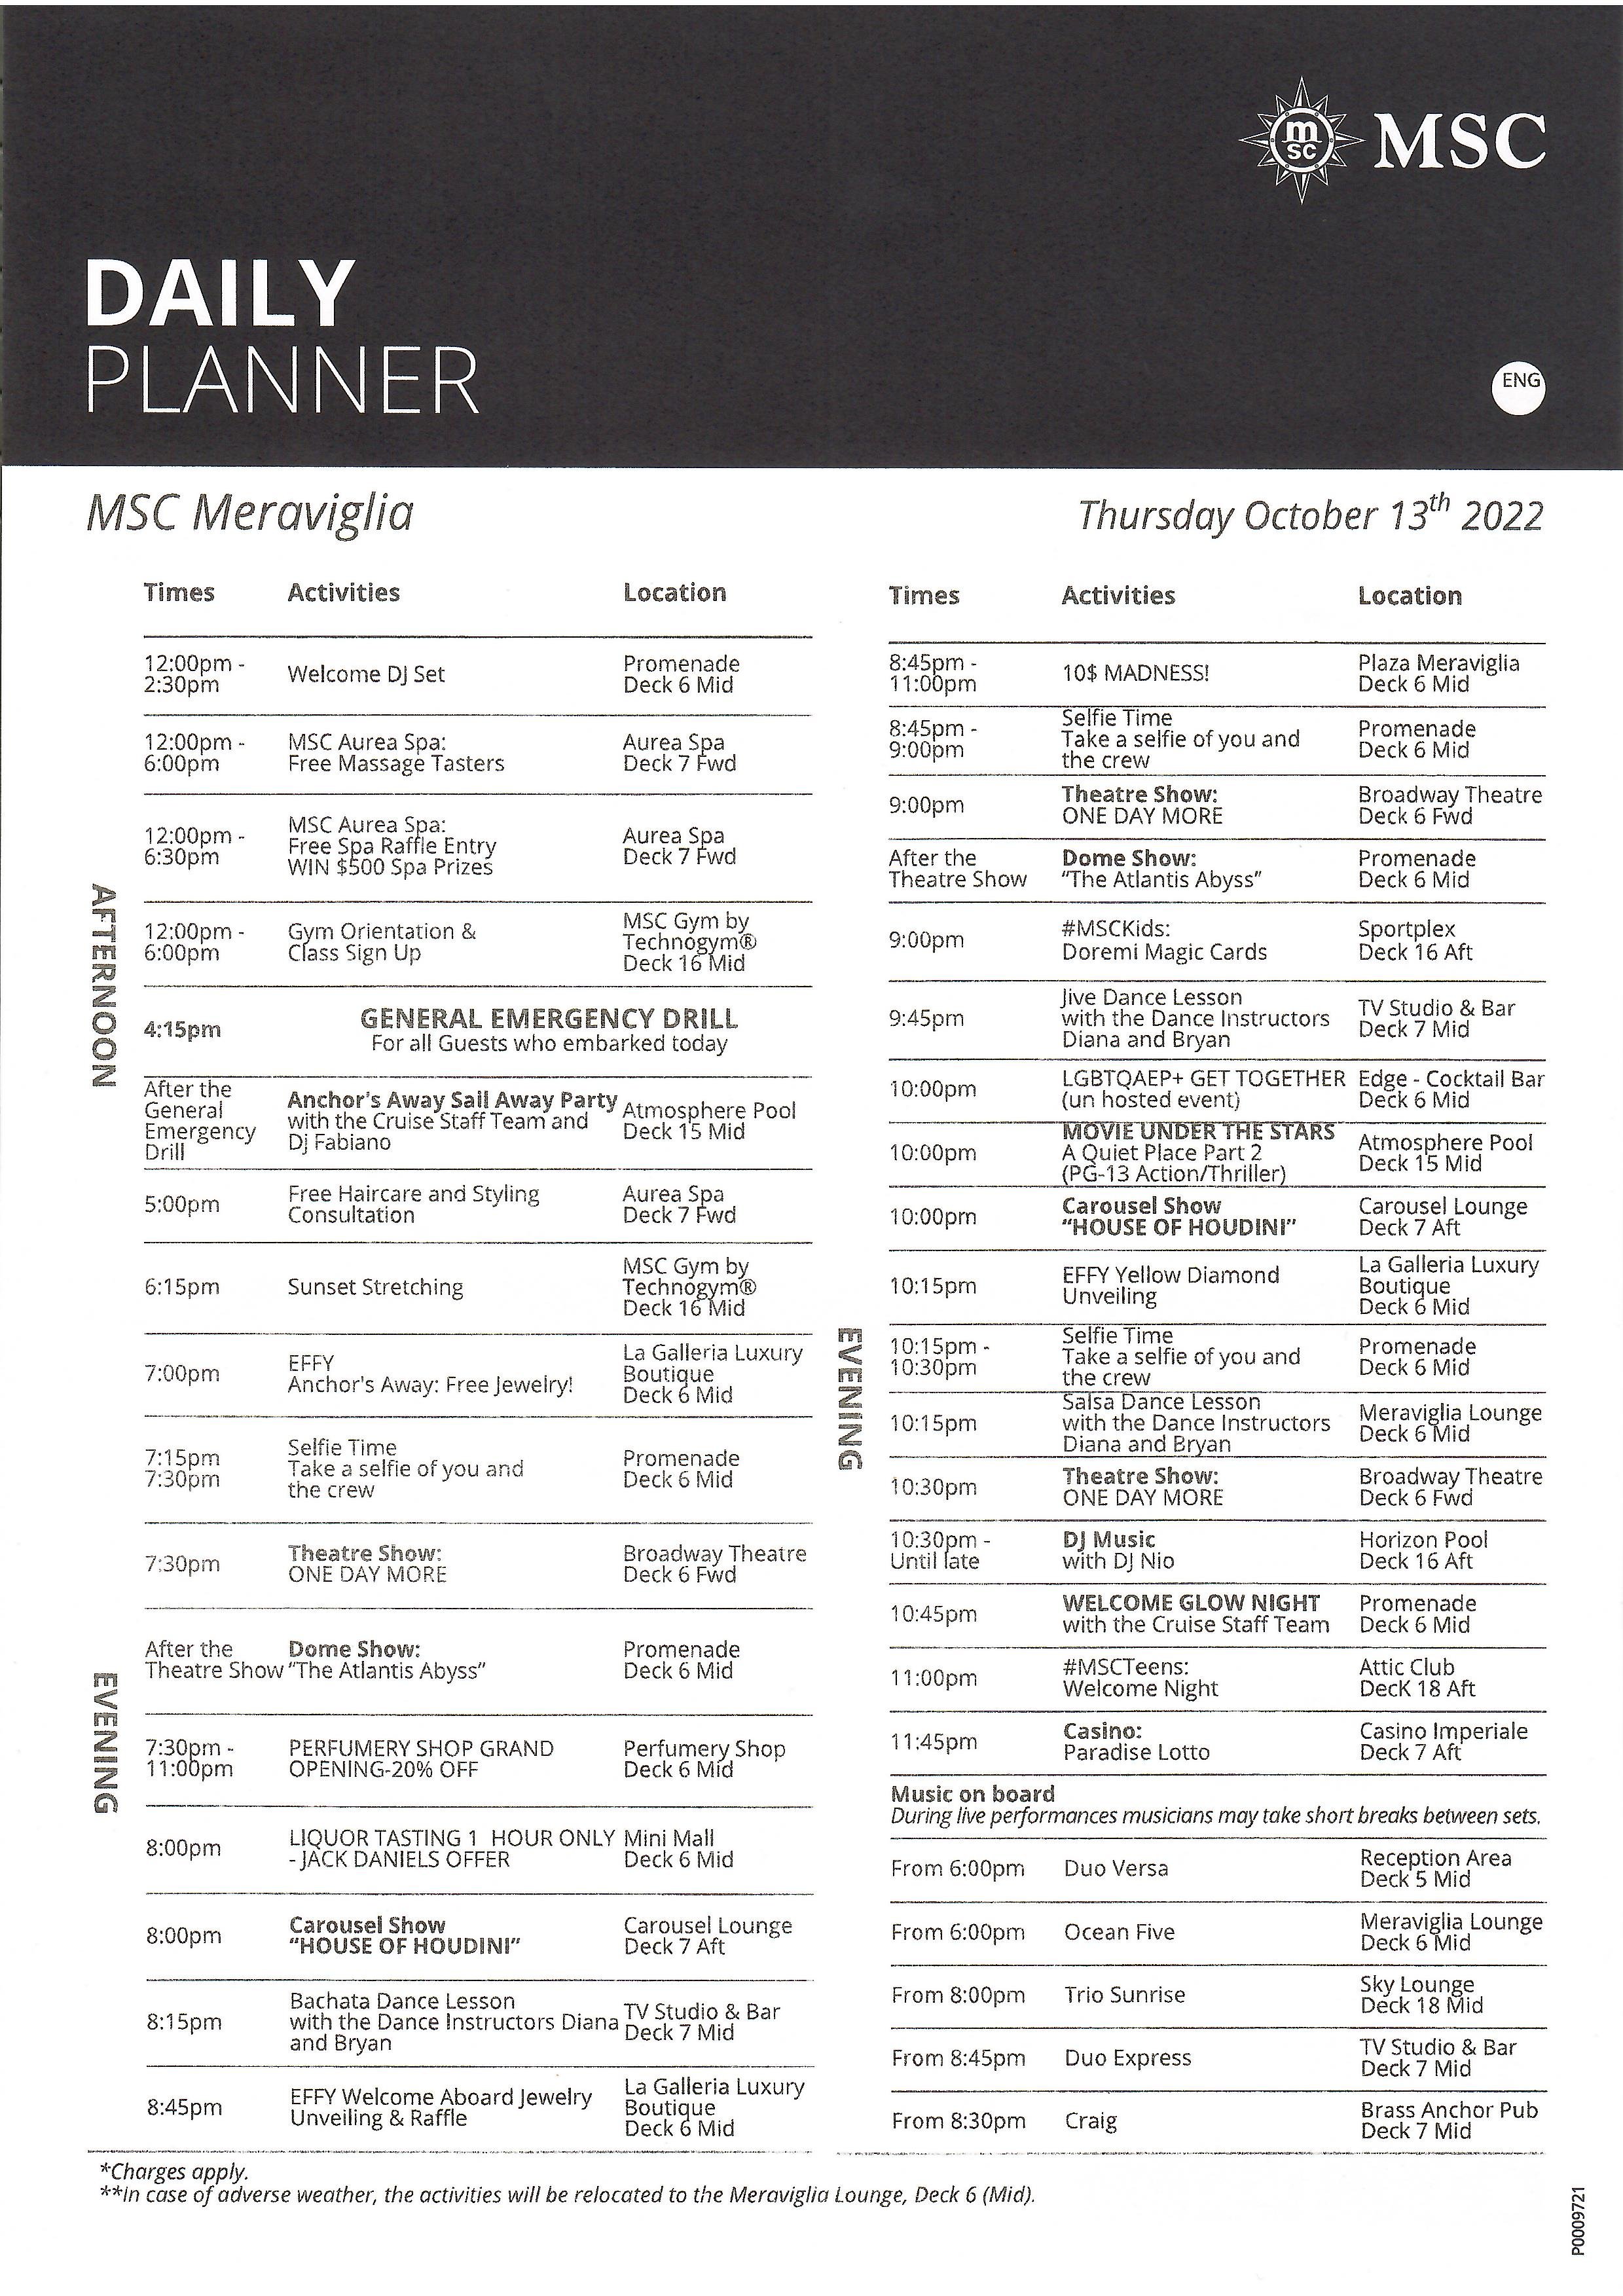 Daily Planner - Embark - Port Canaveral - October 13, 2022 page 01.jpg